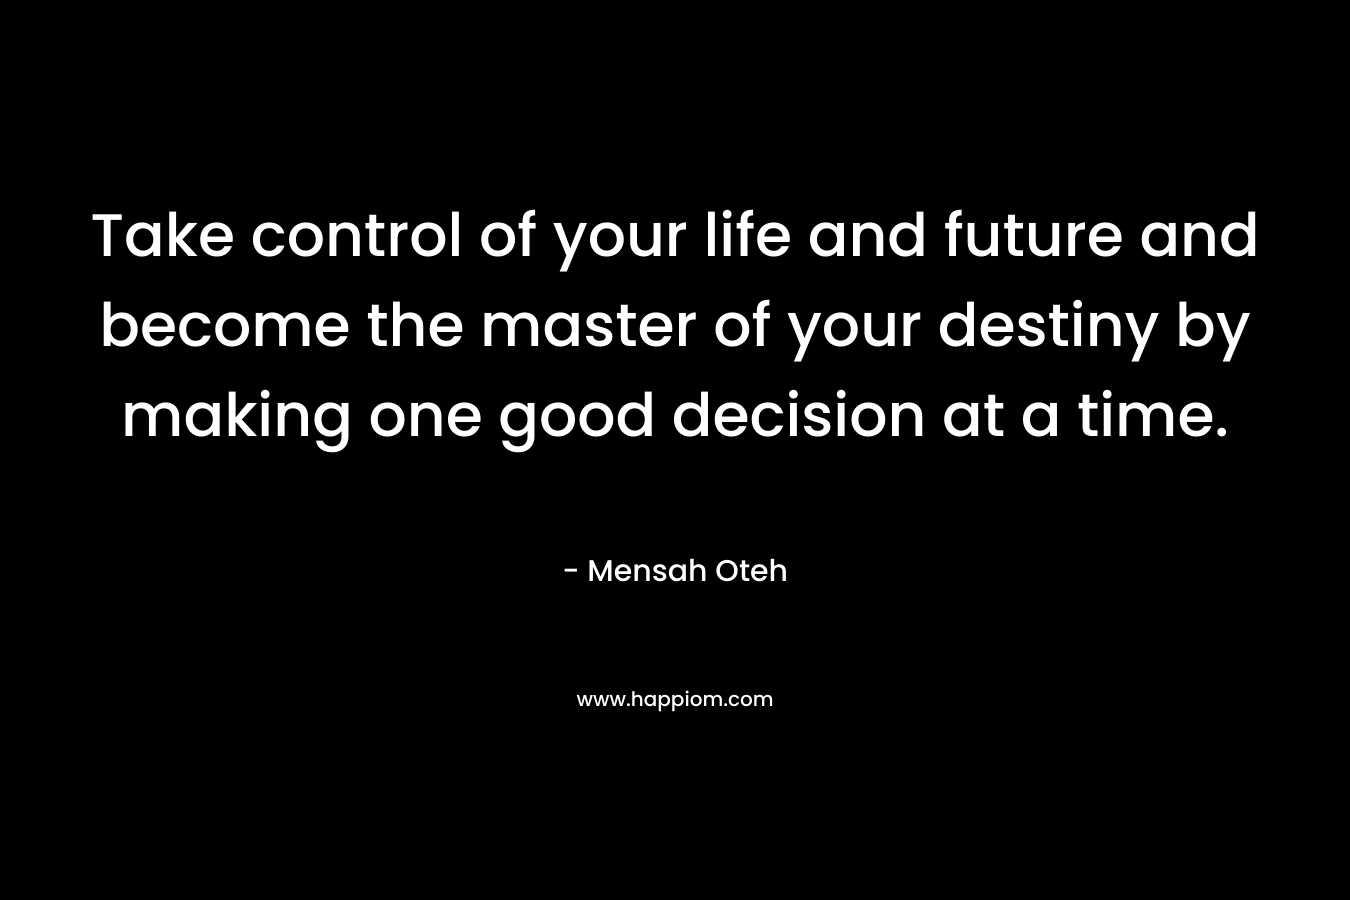 Take control of your life and future and become the master of your destiny by making one good decision at a time.